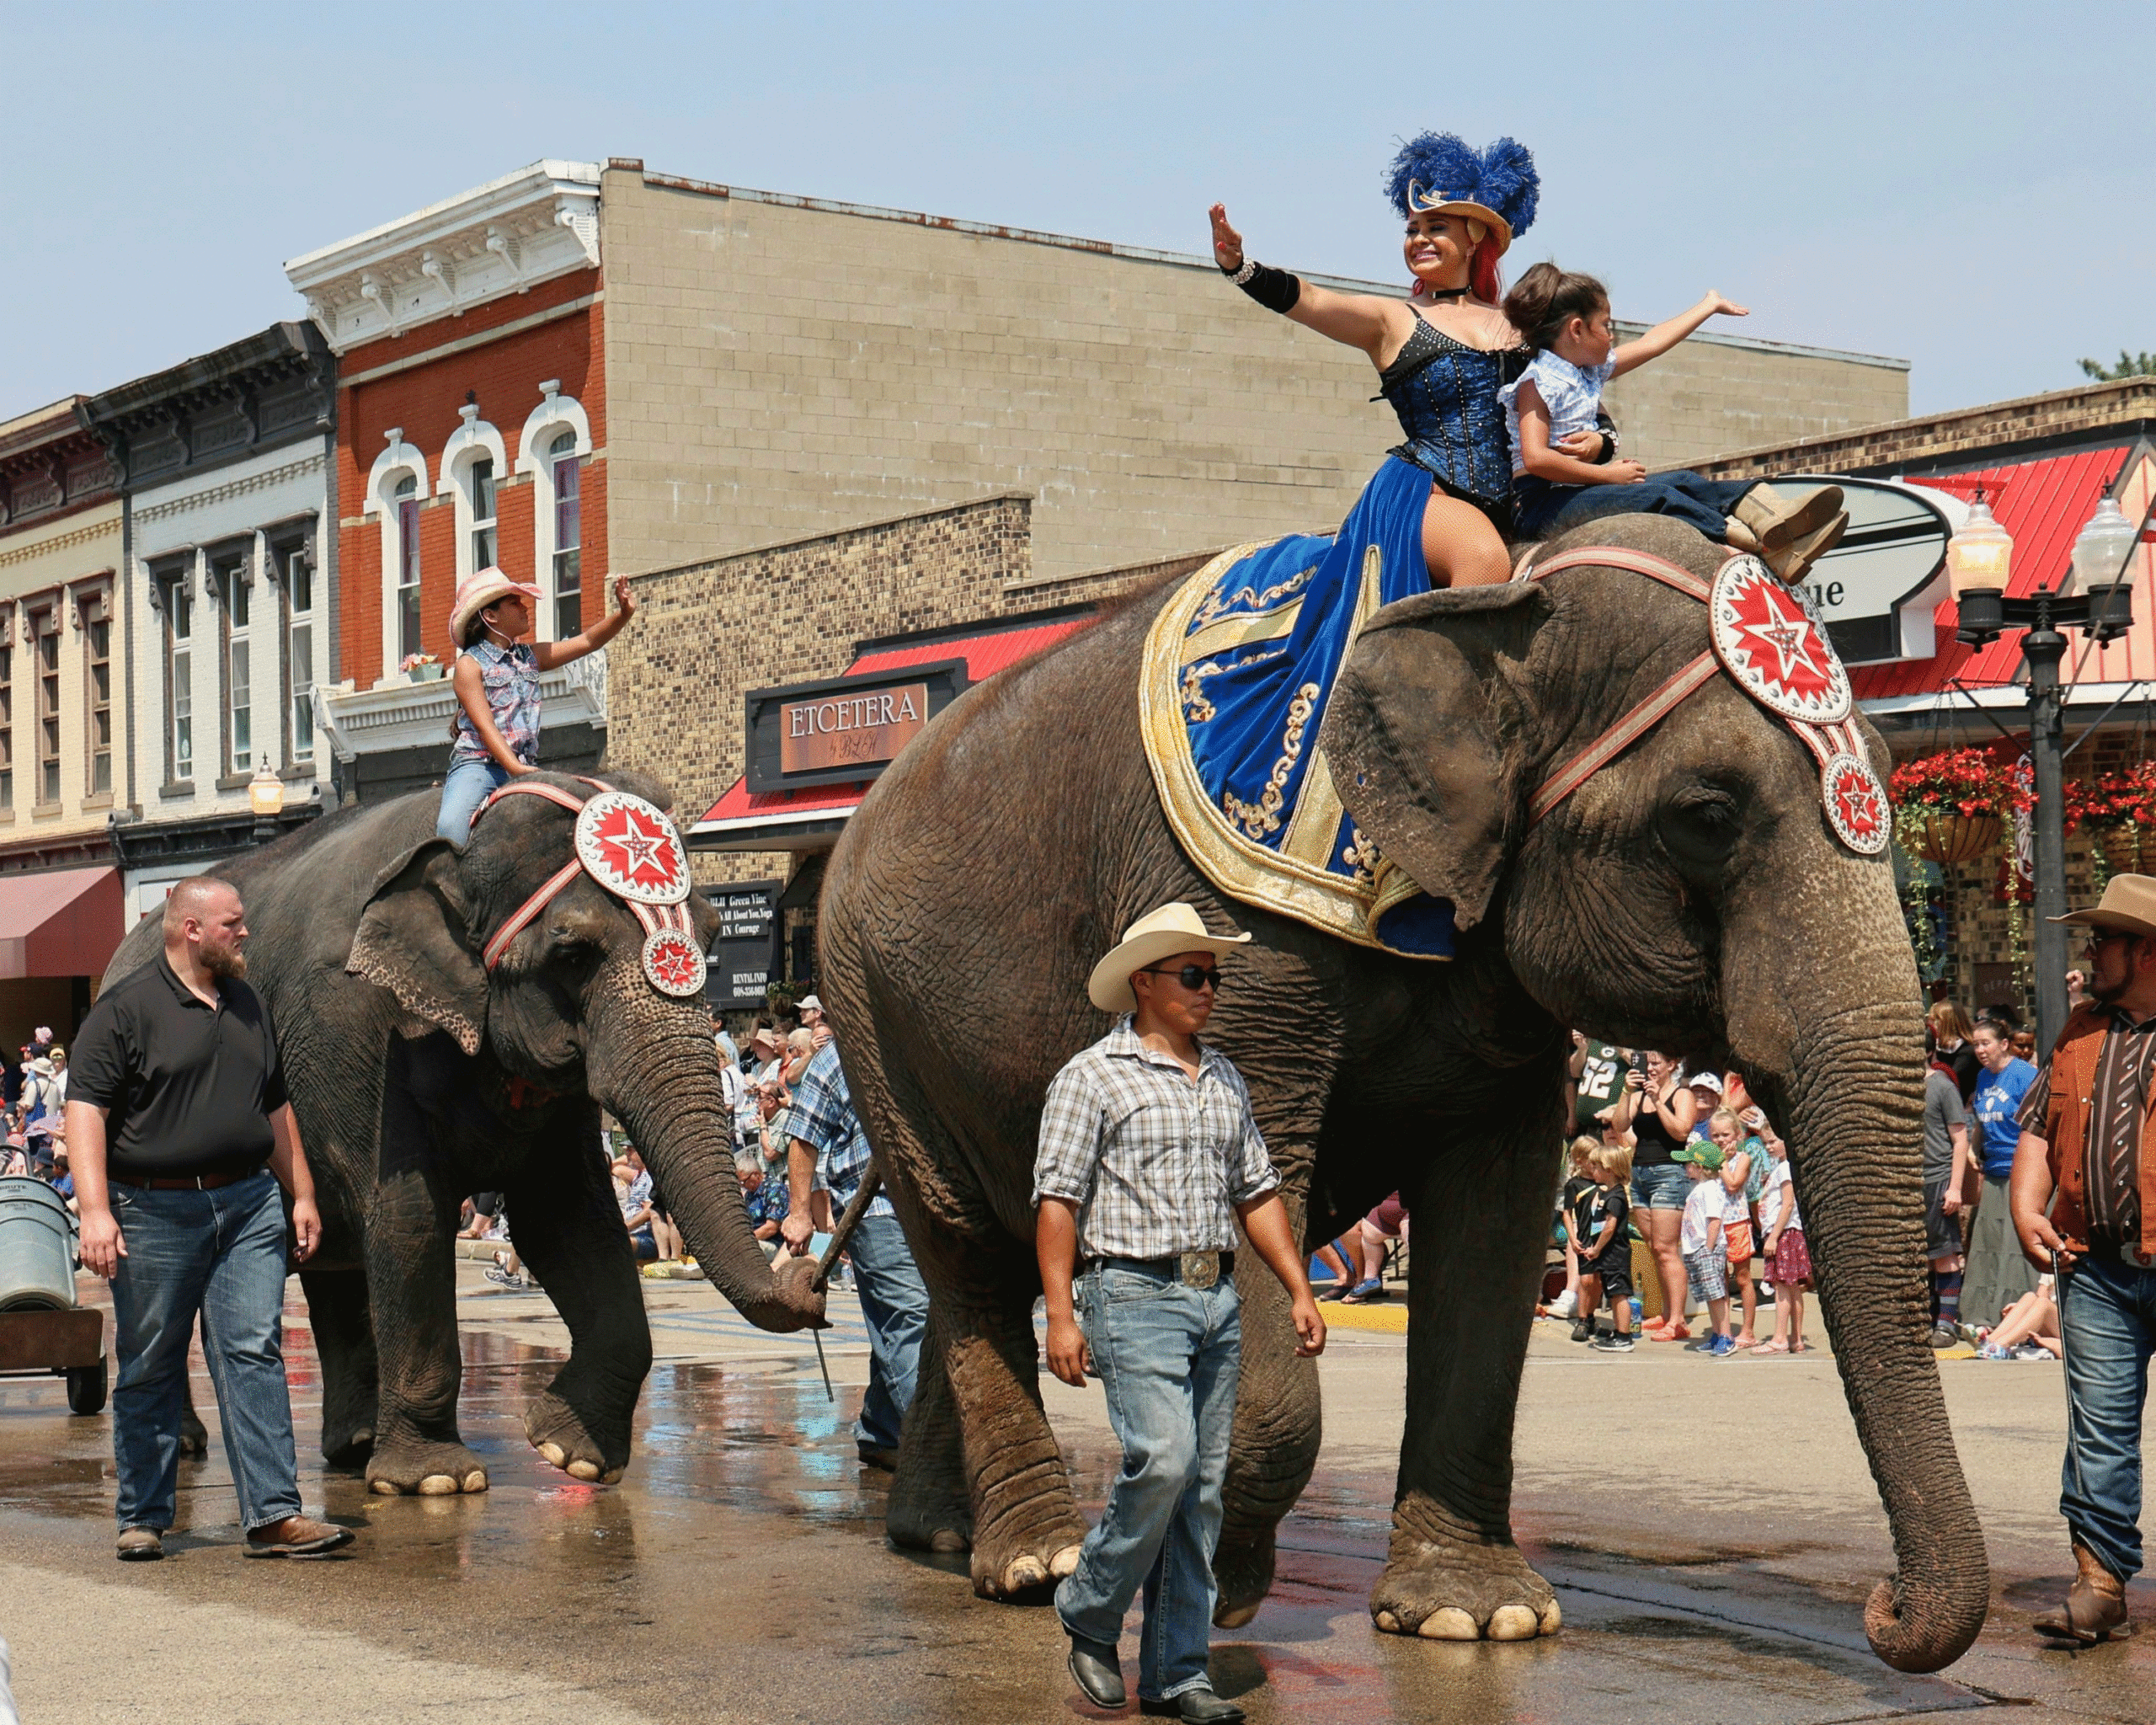 Circus World Cast Members Ride Elephants In Parade